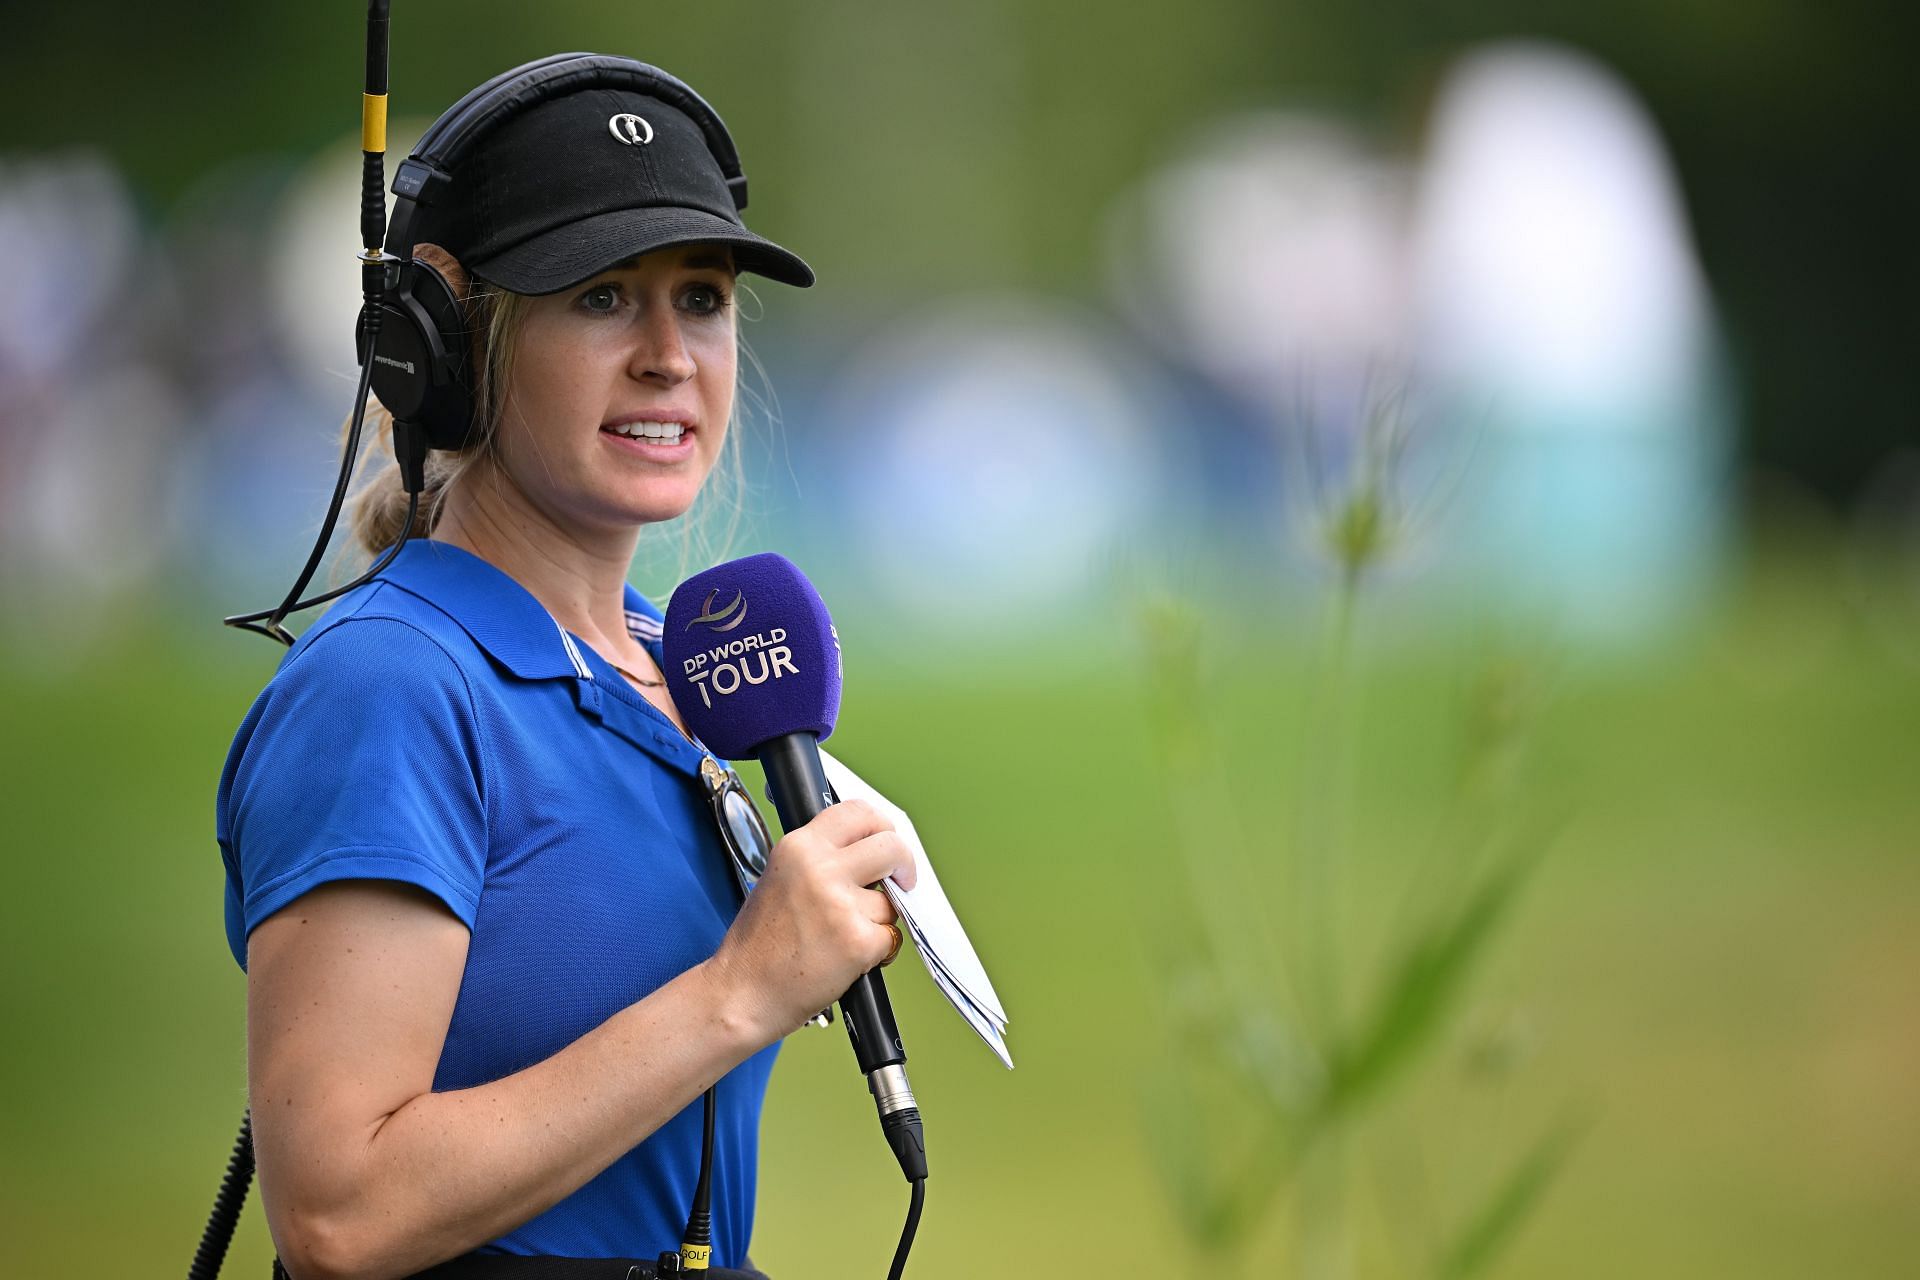 Iona Stephen at the BMW International Open (Image via Getty)